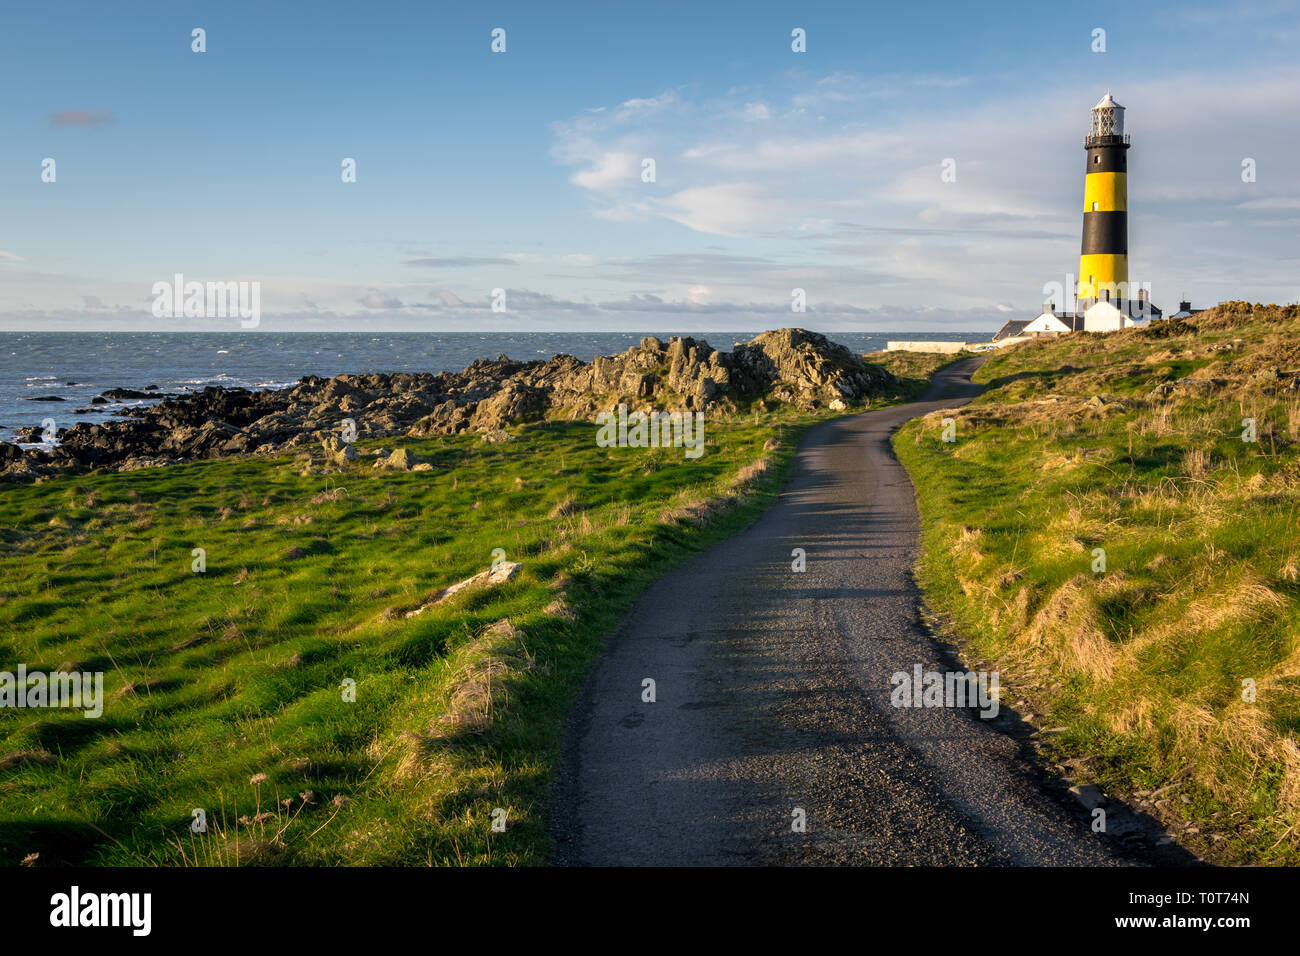 This is a picture of St John's Point Lighthouse  on the east coast of Northern Ireland on the Irish Sea.  It is one of Irelands many iconic coastal li Stock Photo